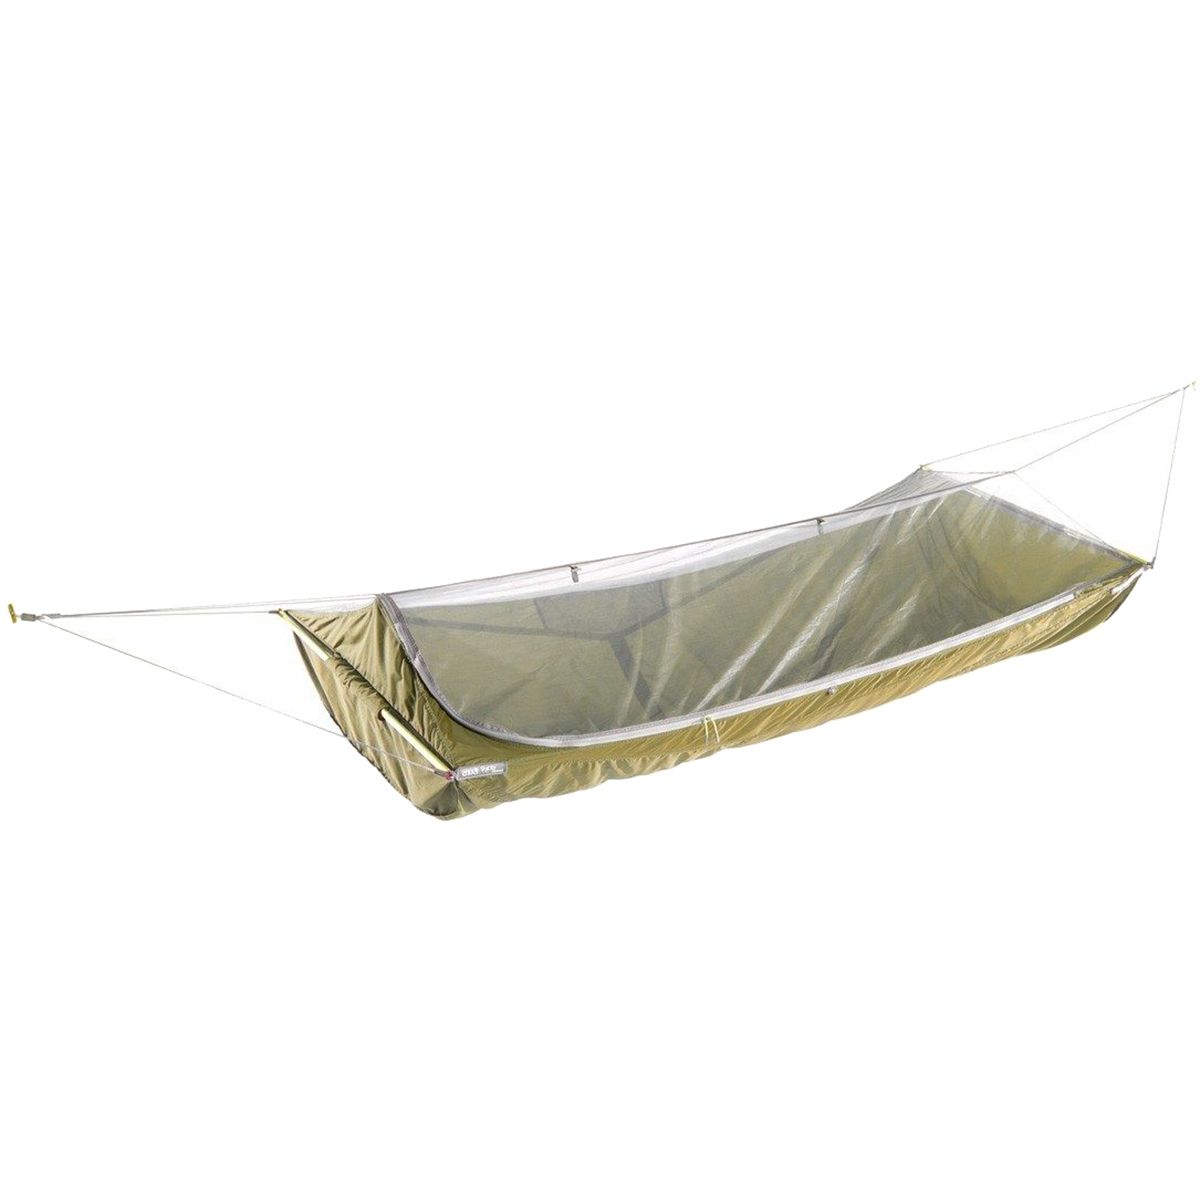  Eagles Nest Outfitters SkyLite Hammock - Hike & Camp